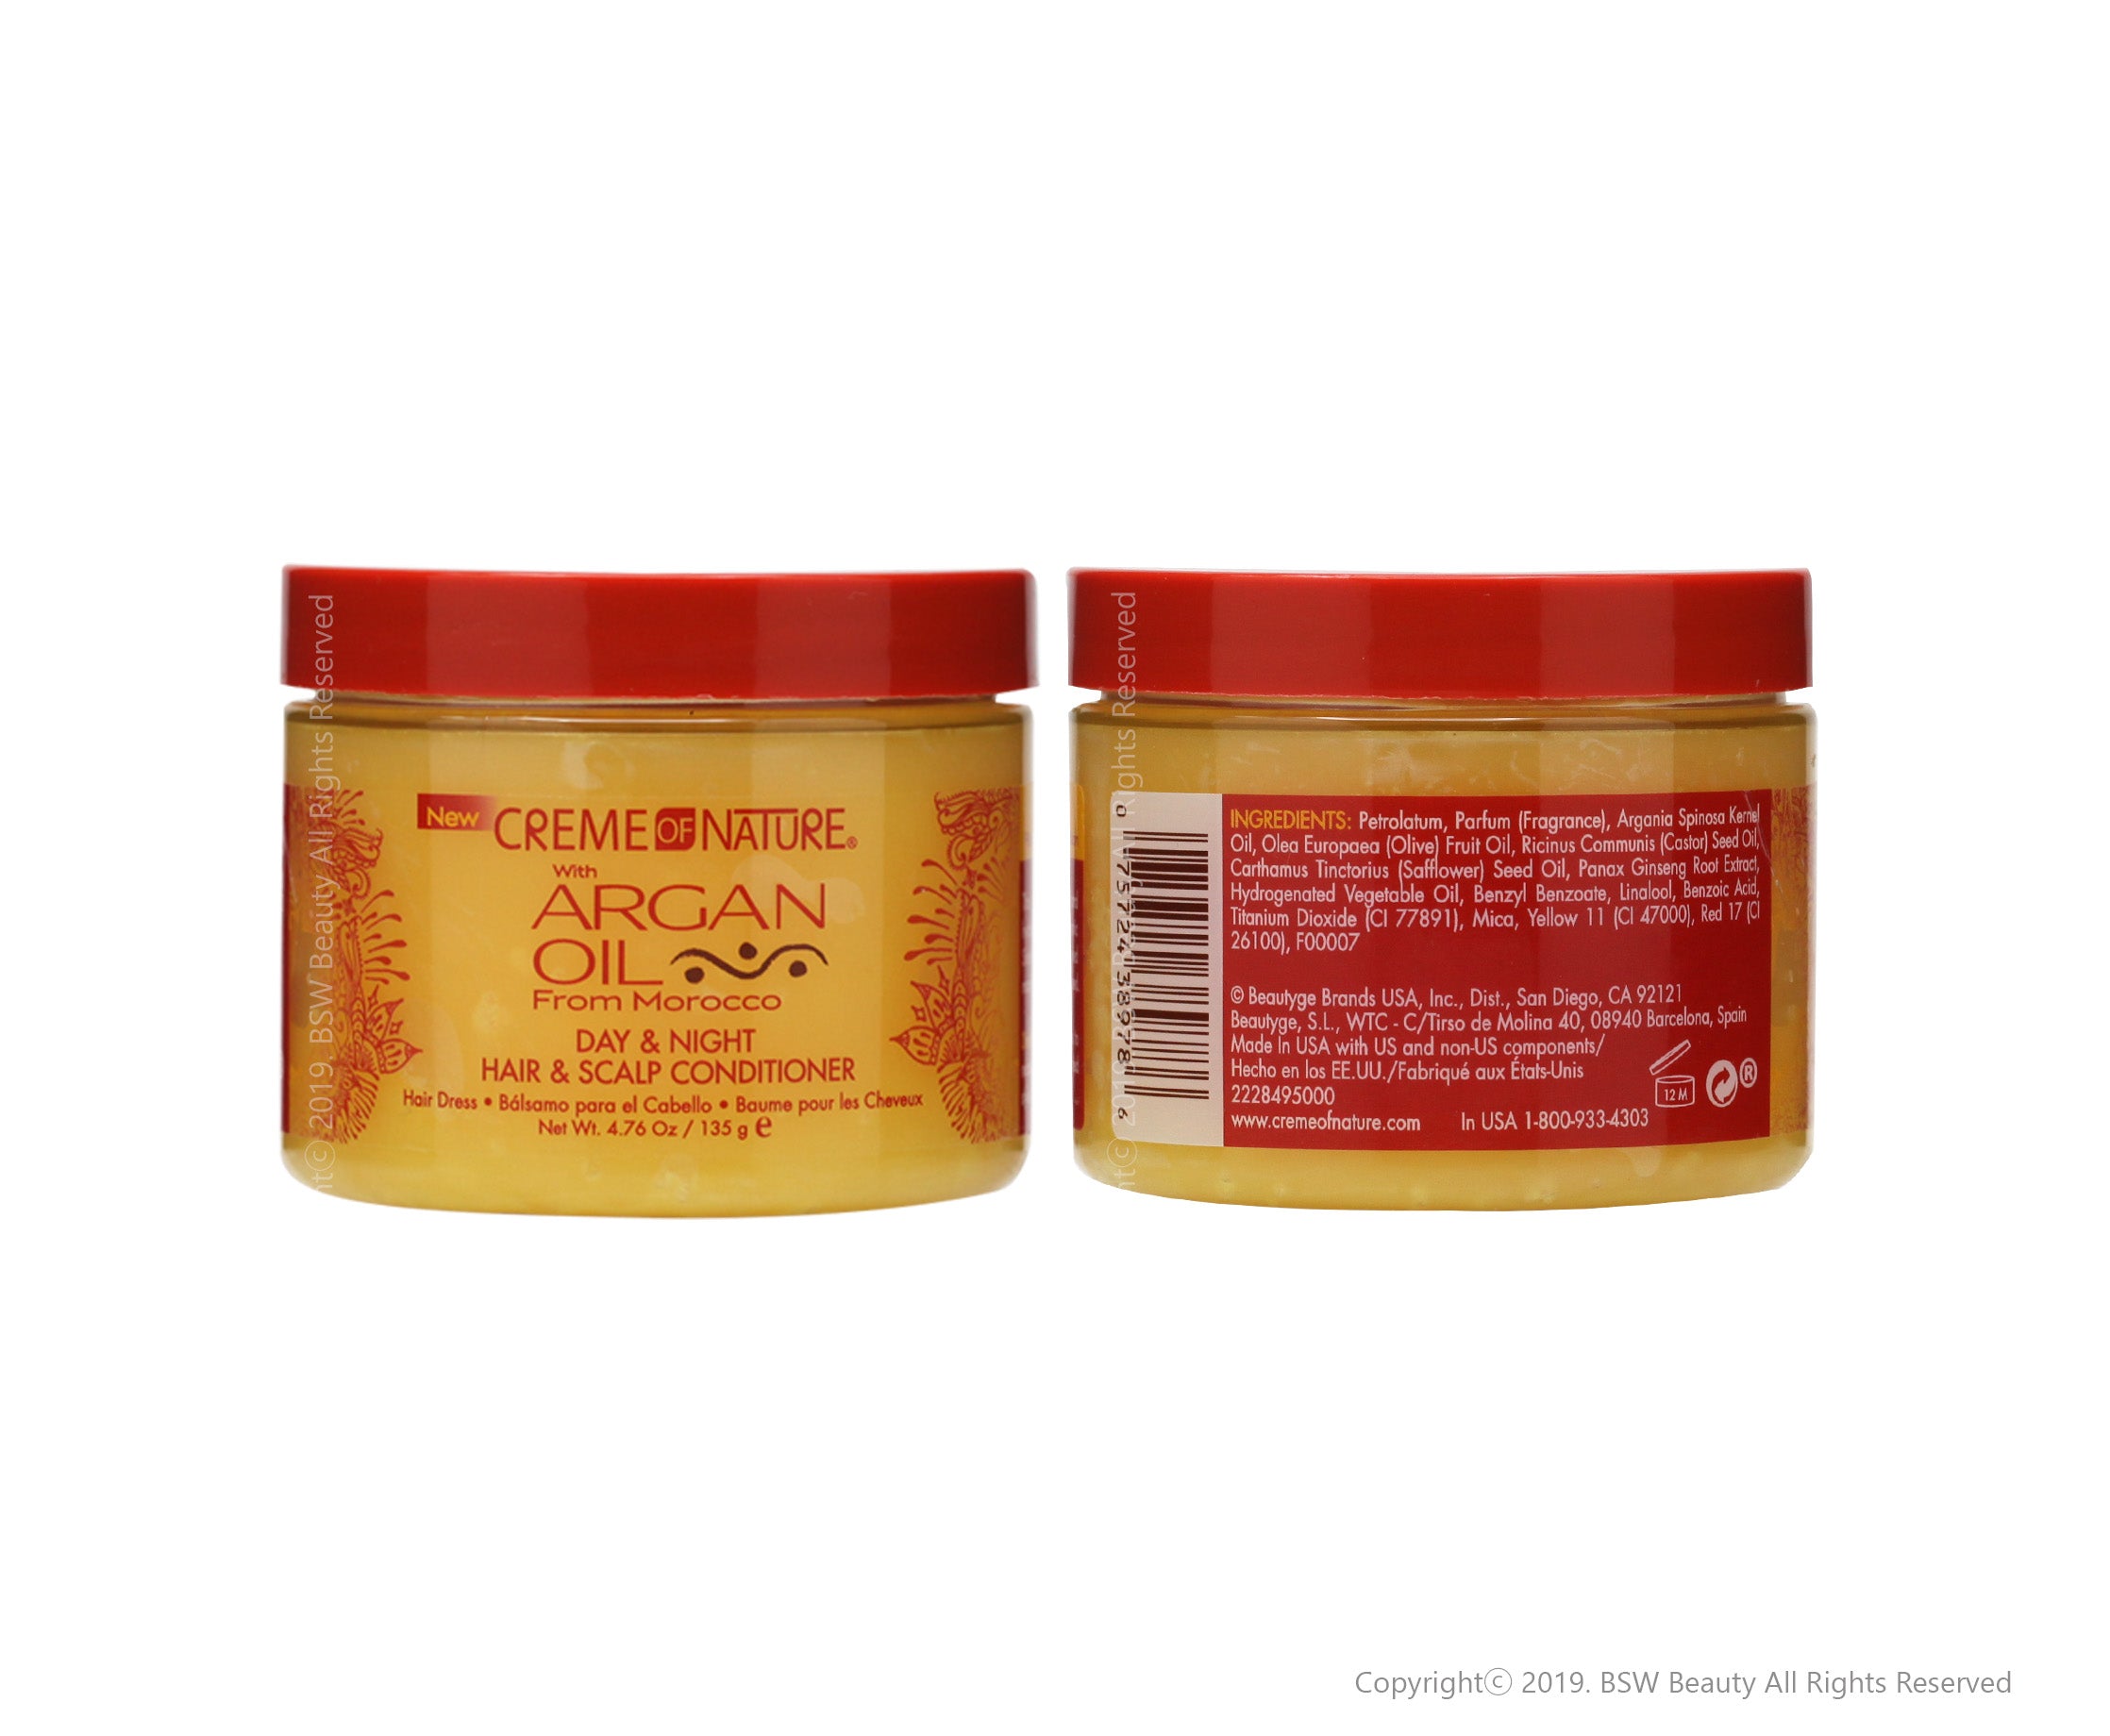 CREME OF NATURE ARGAN OIL DAY & NIGHT, HAIR & SCALP CONDITIONER 4.76oz